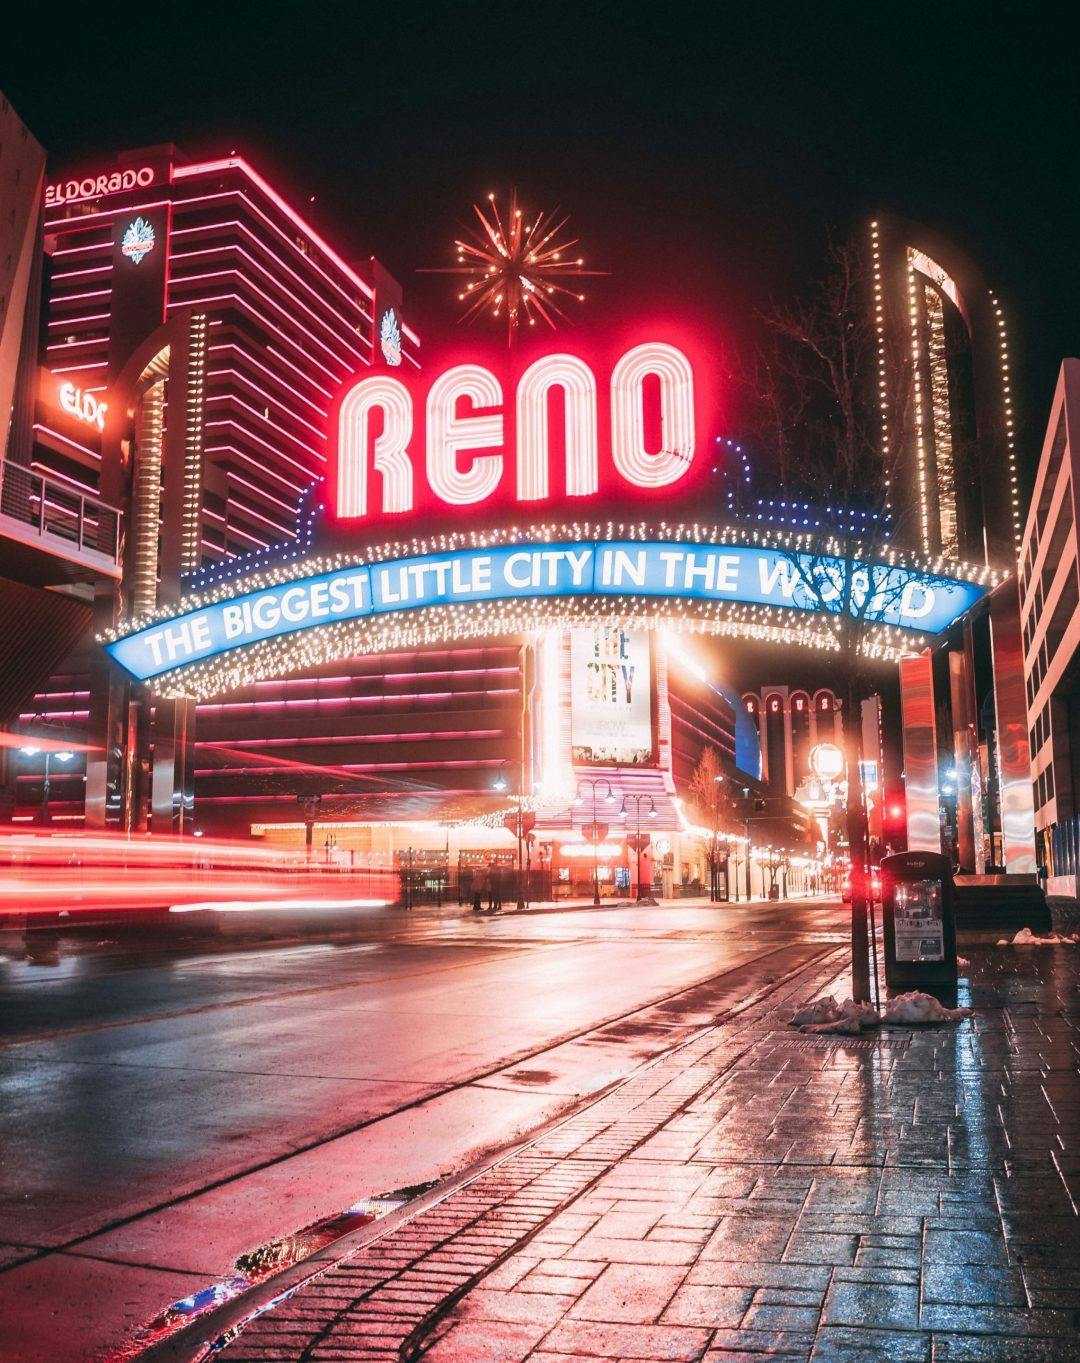 Welcome to Reno sign